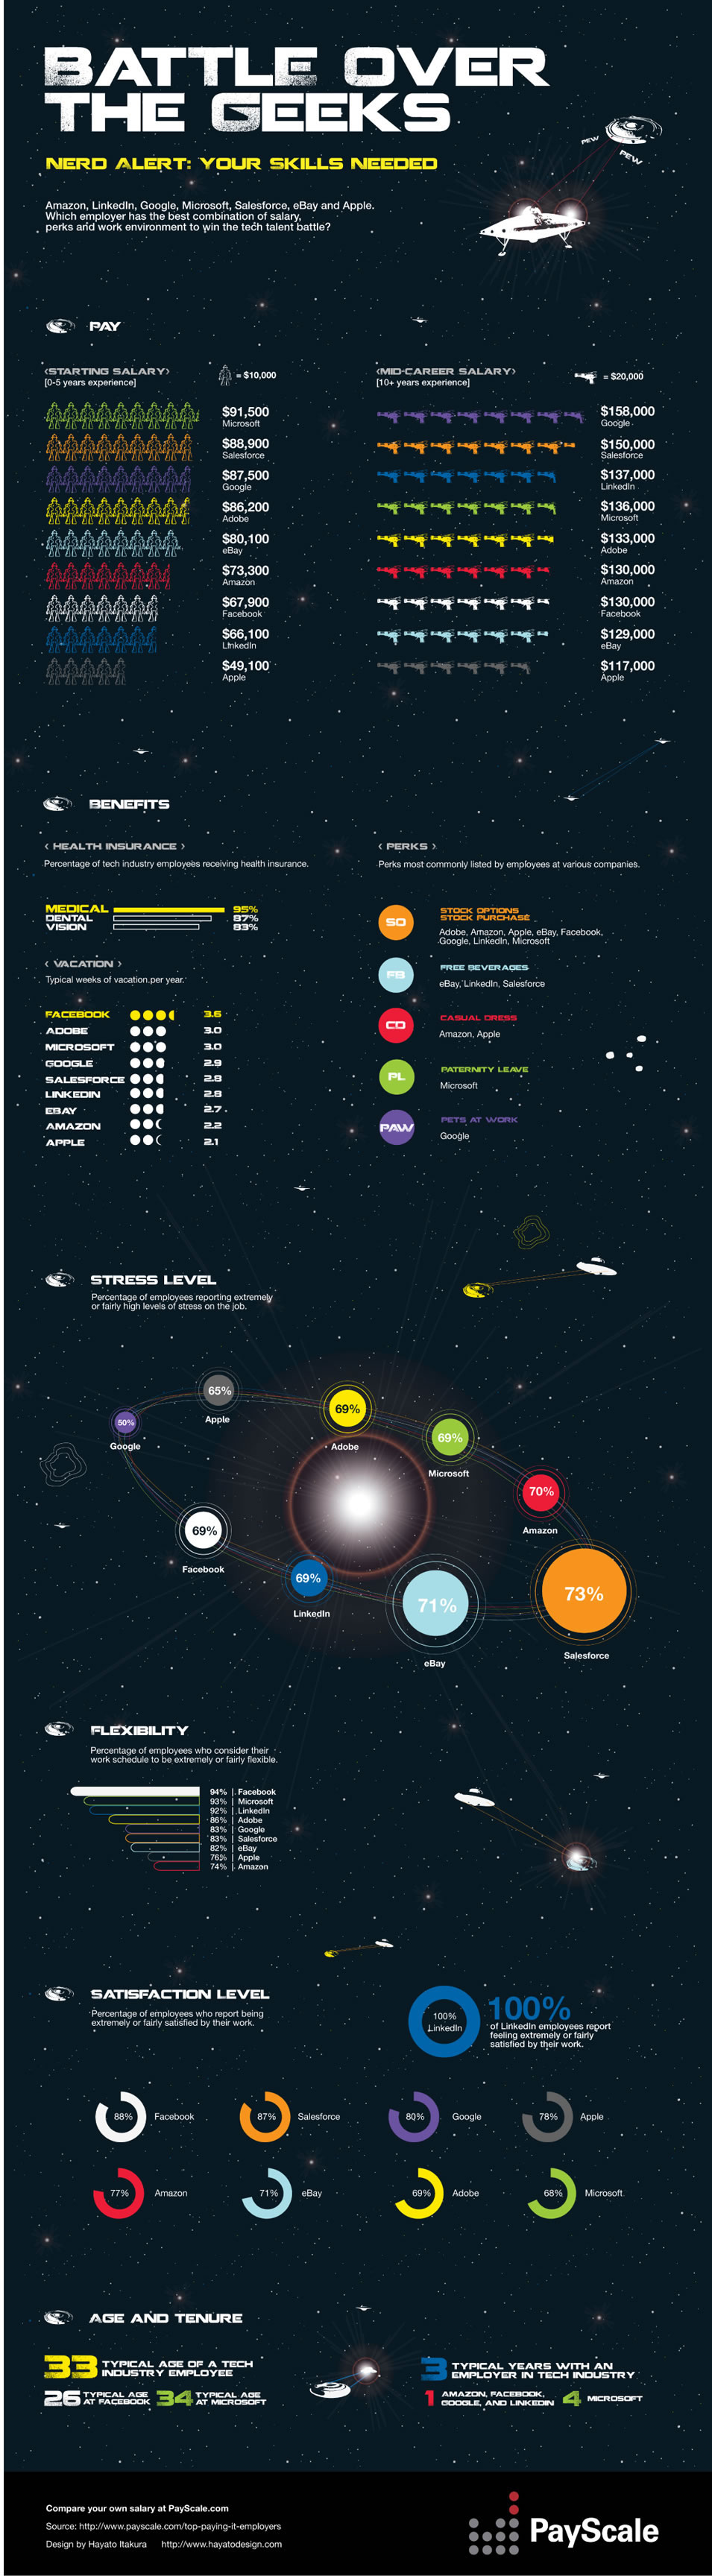 Battle-Over-The-Geeks-Infographic